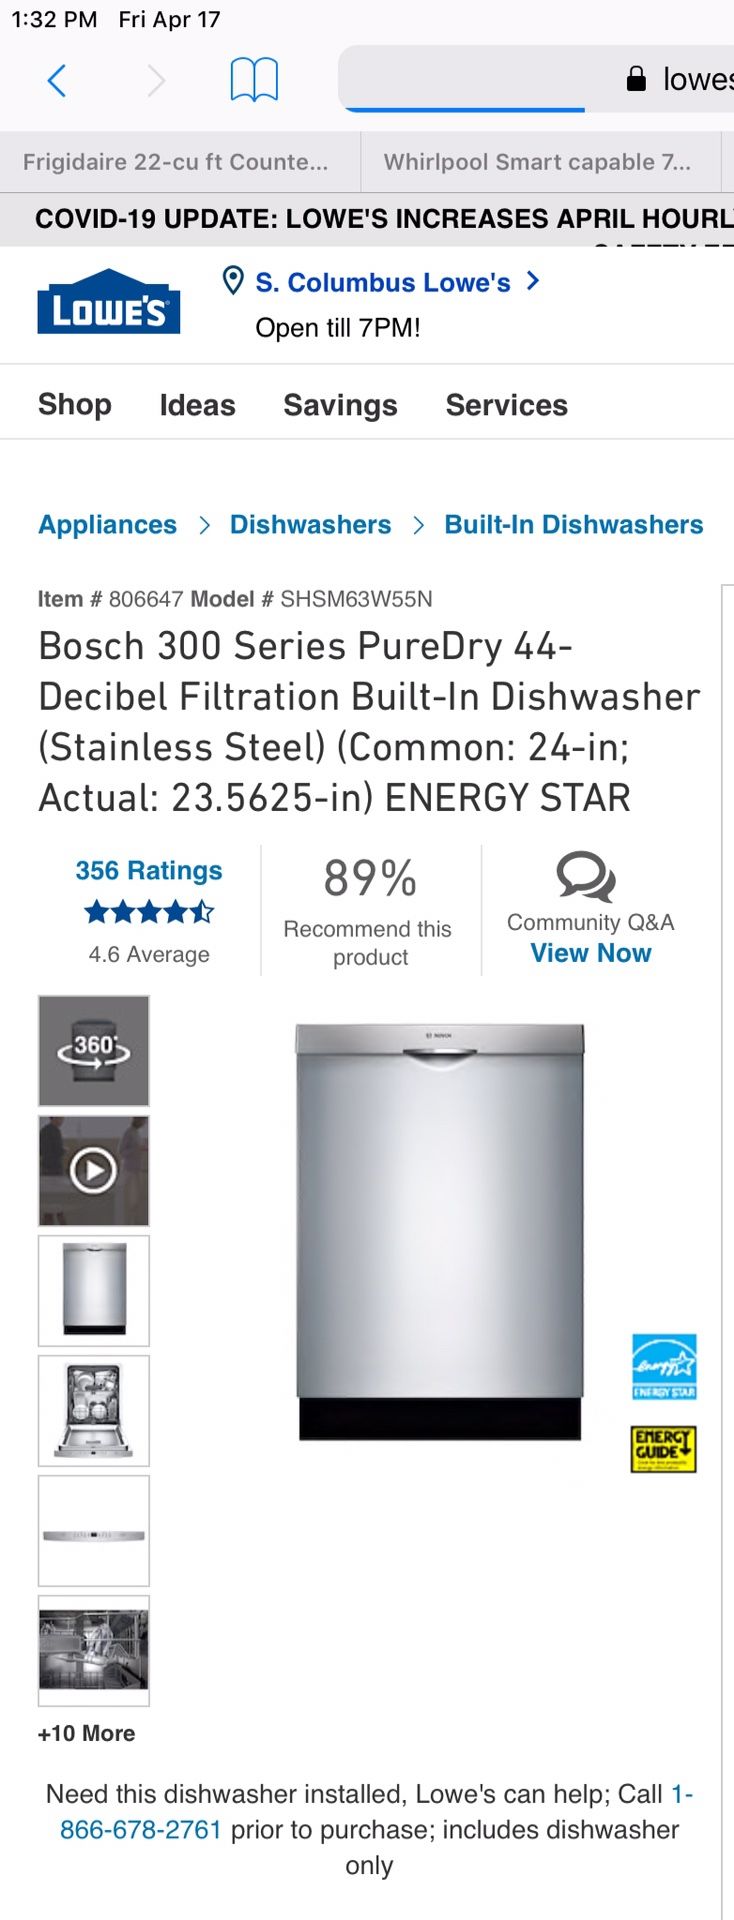 Bosch dishwasher scratched $450 by appointment